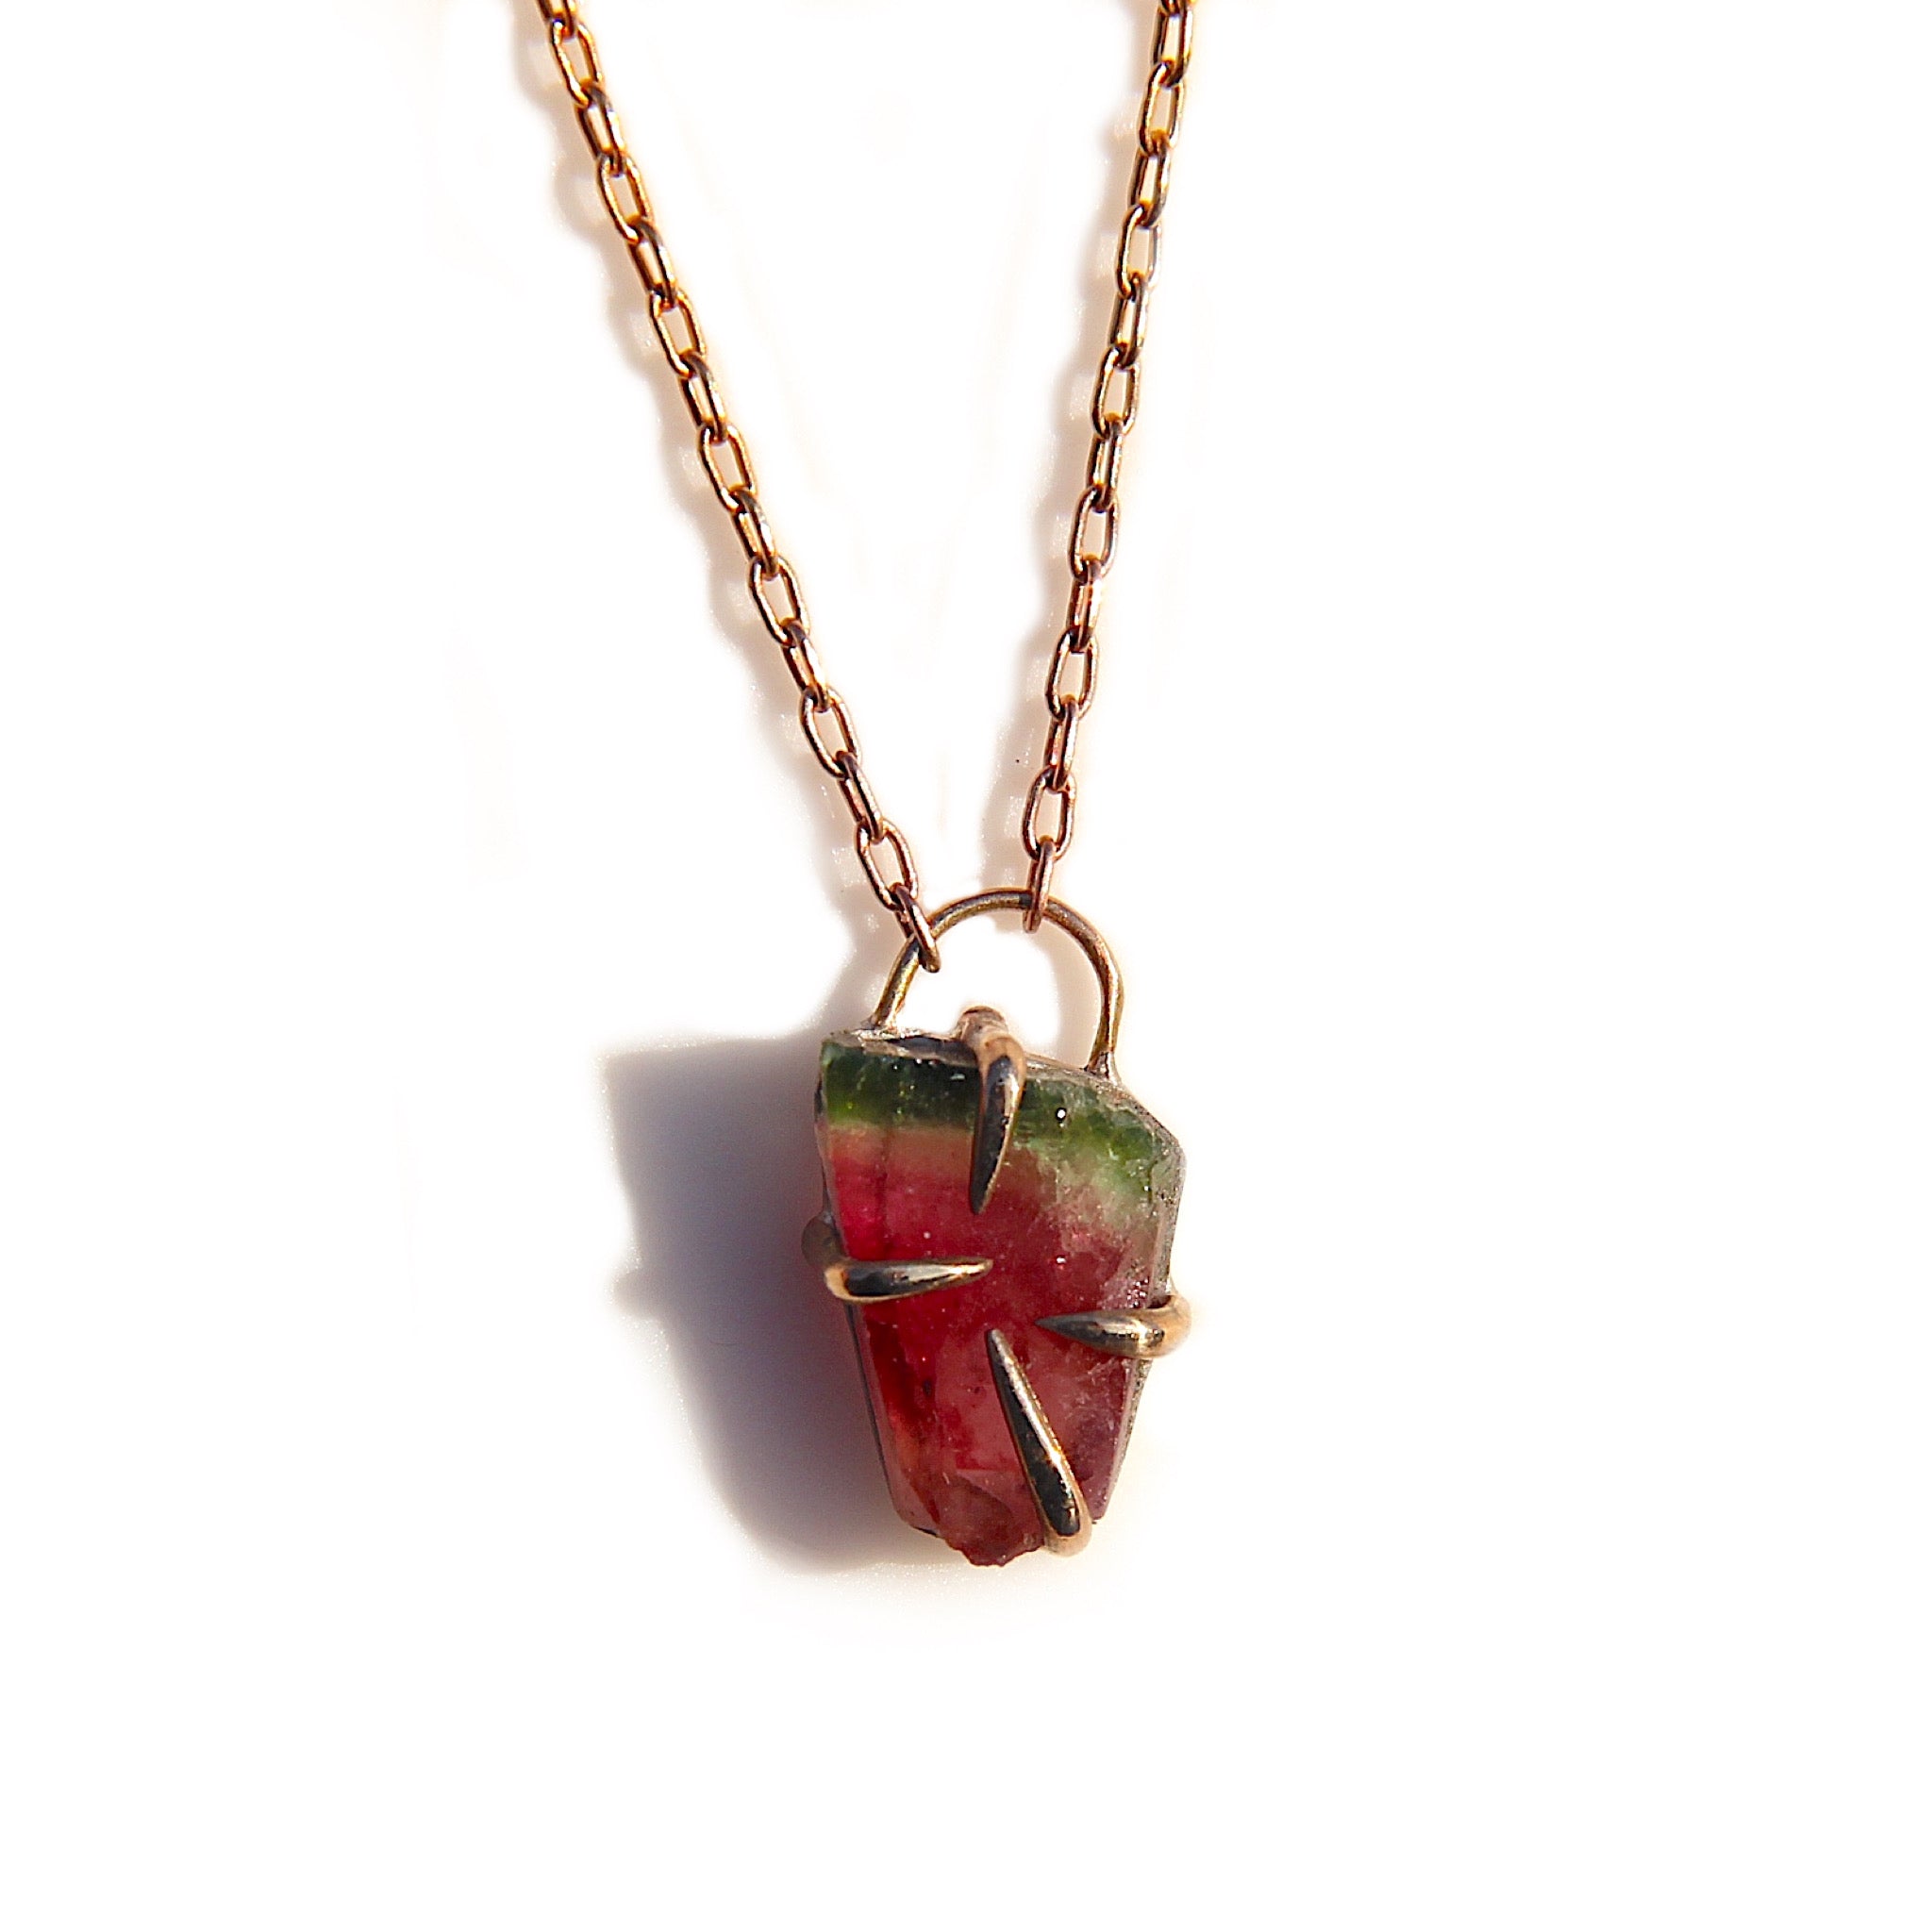 This slice is right! Watermelon tourmaline necklace